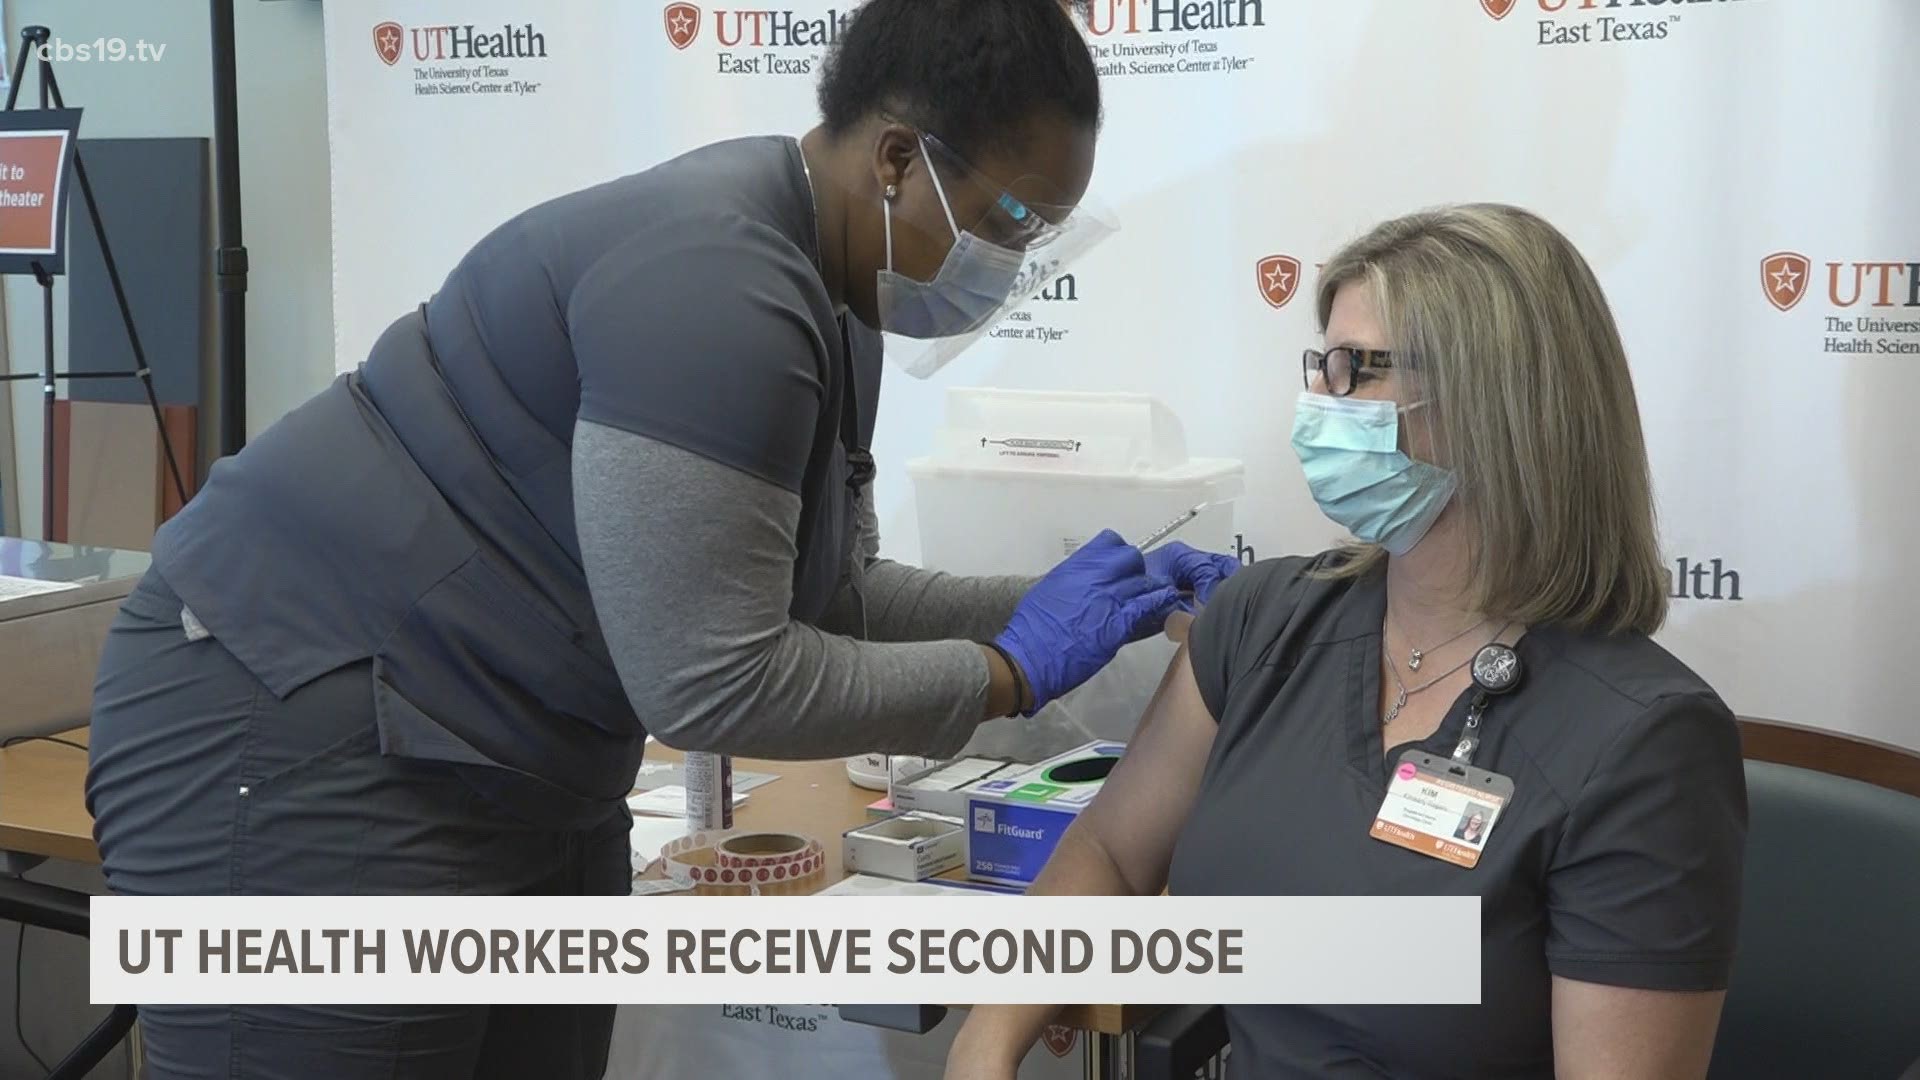 UT Health East Texas health care workers received the second dose of the Pfizer-BioNTech vaccine Tuesday, which is given in two doses 21 days apart.